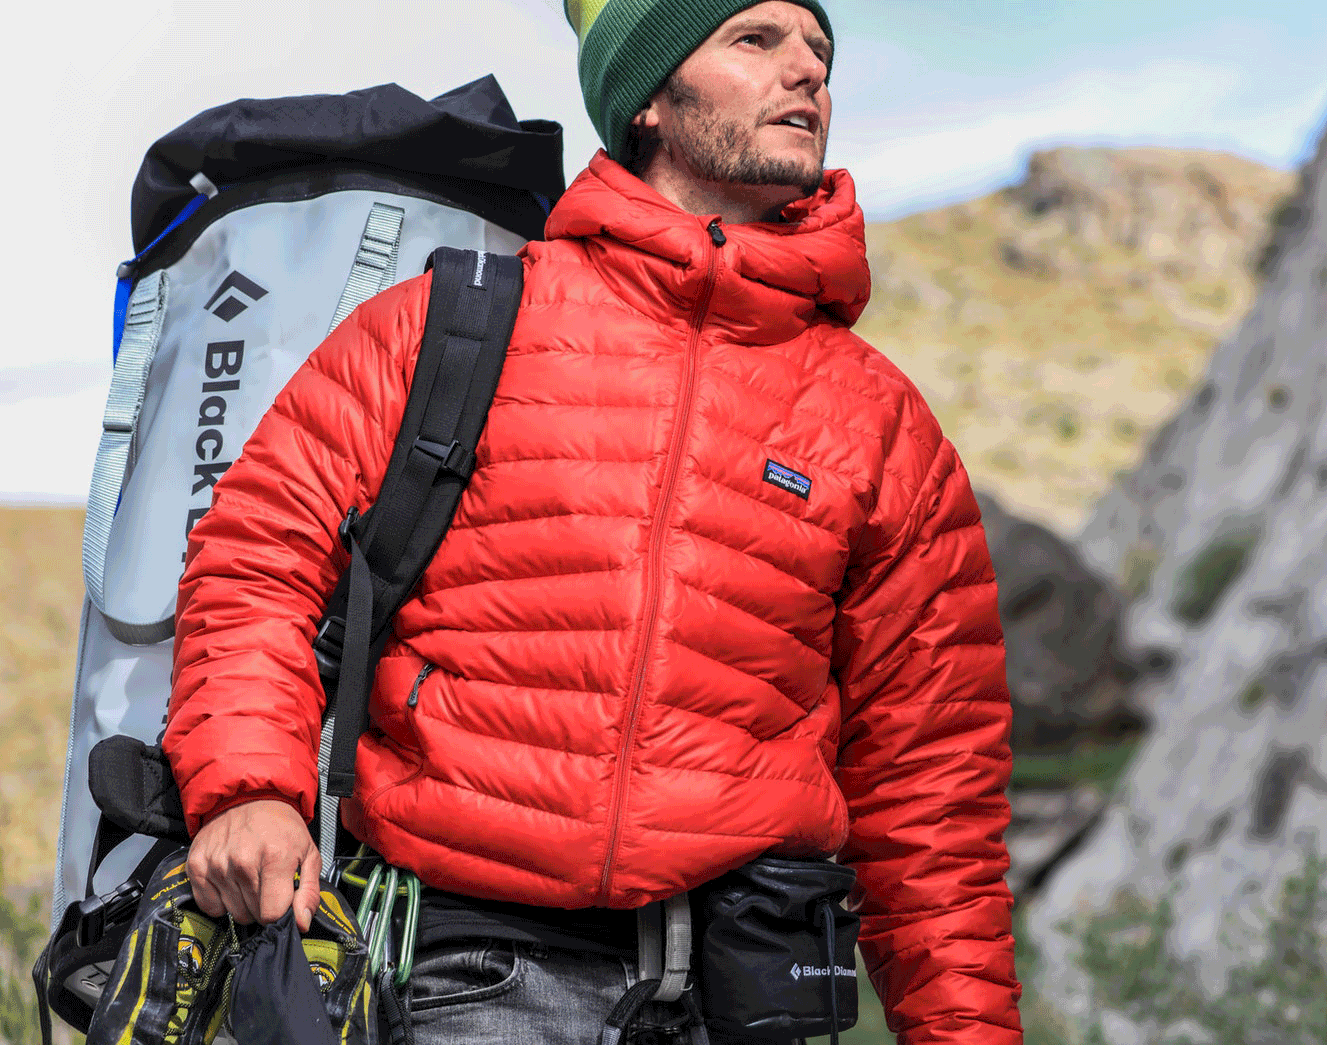 Mountain climber in Patagonia jacket preparing to climb with equipment